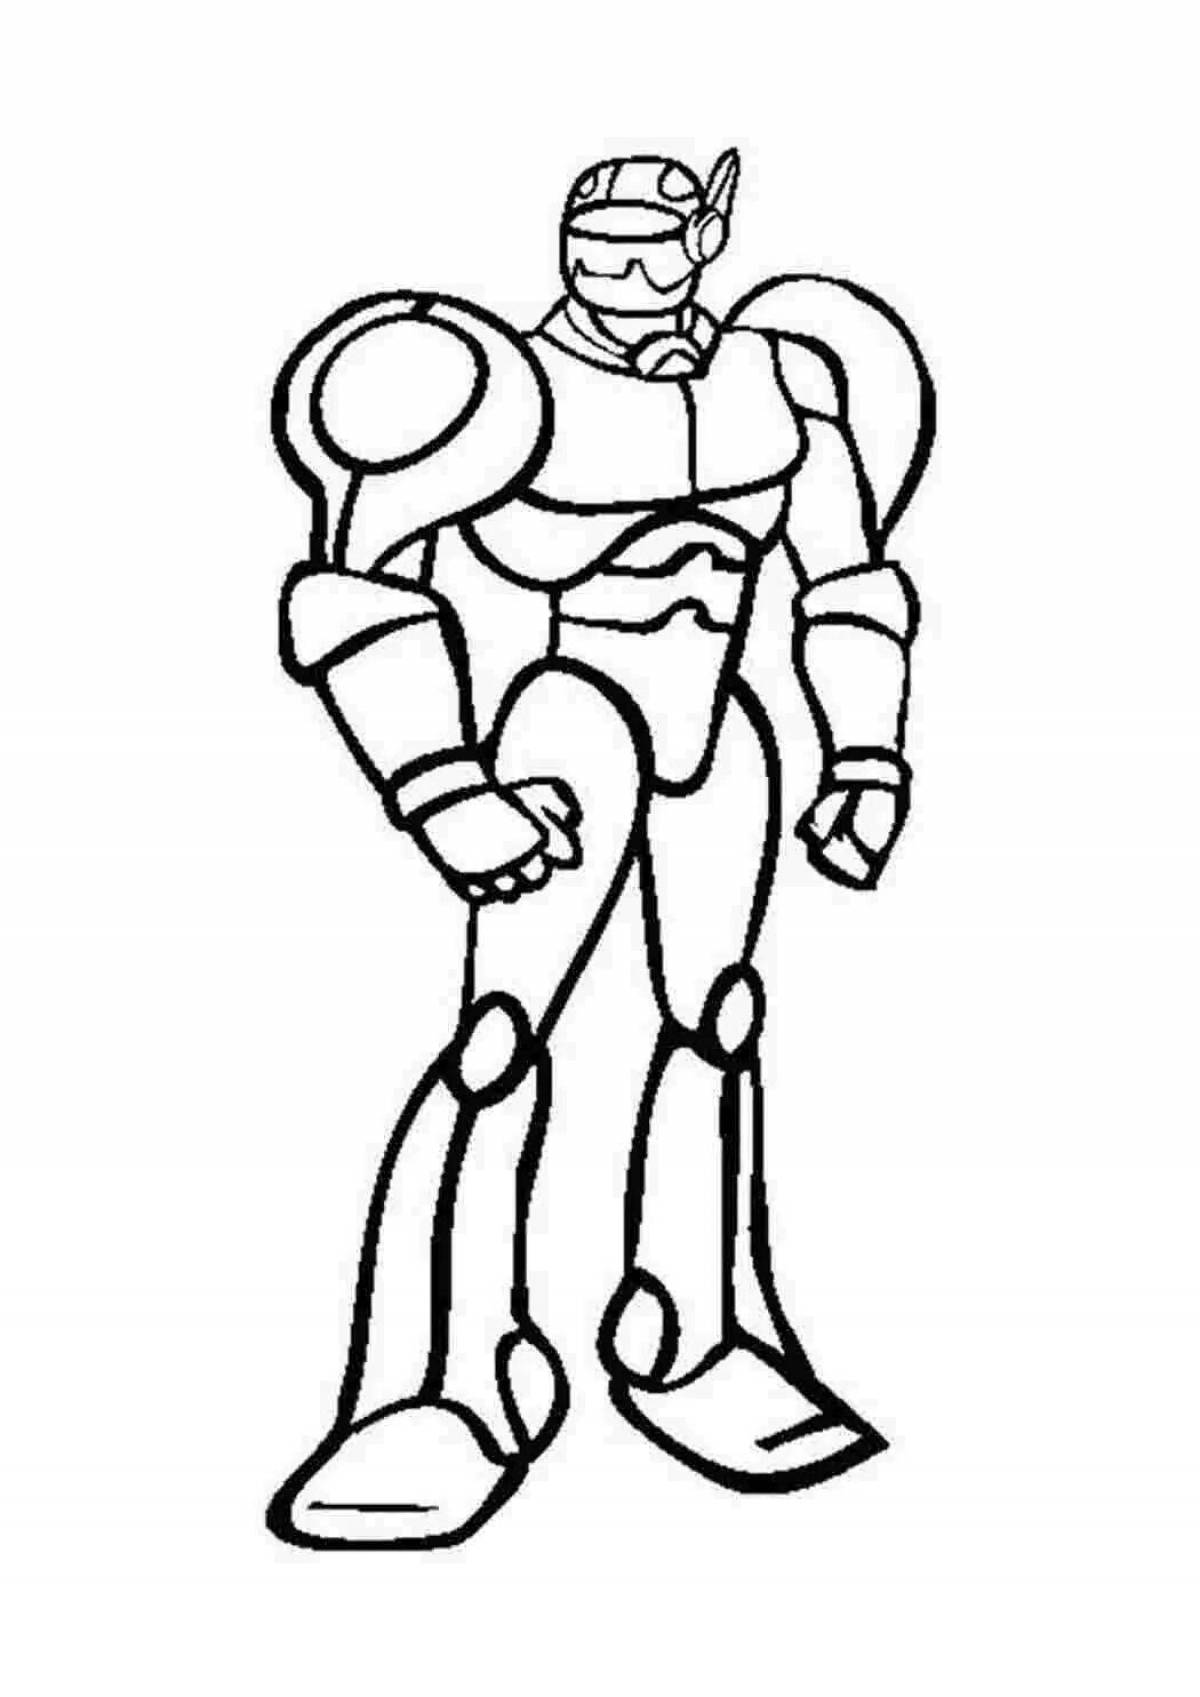 Creative robot coloring page for 5 year olds